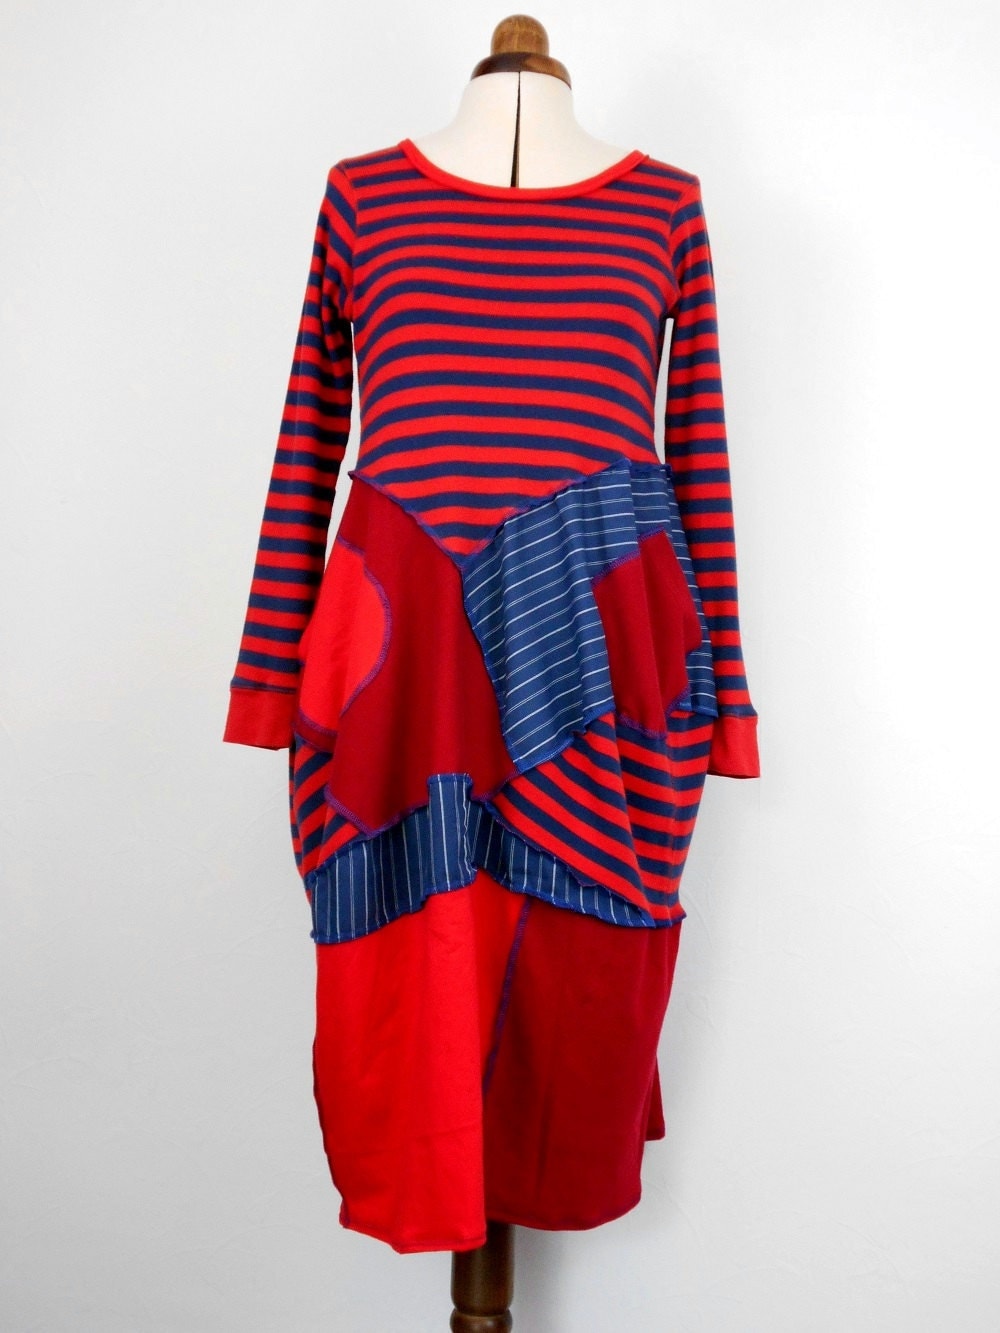 Upcycled Red and Blue Striped Teeshirt Dress / Recycled